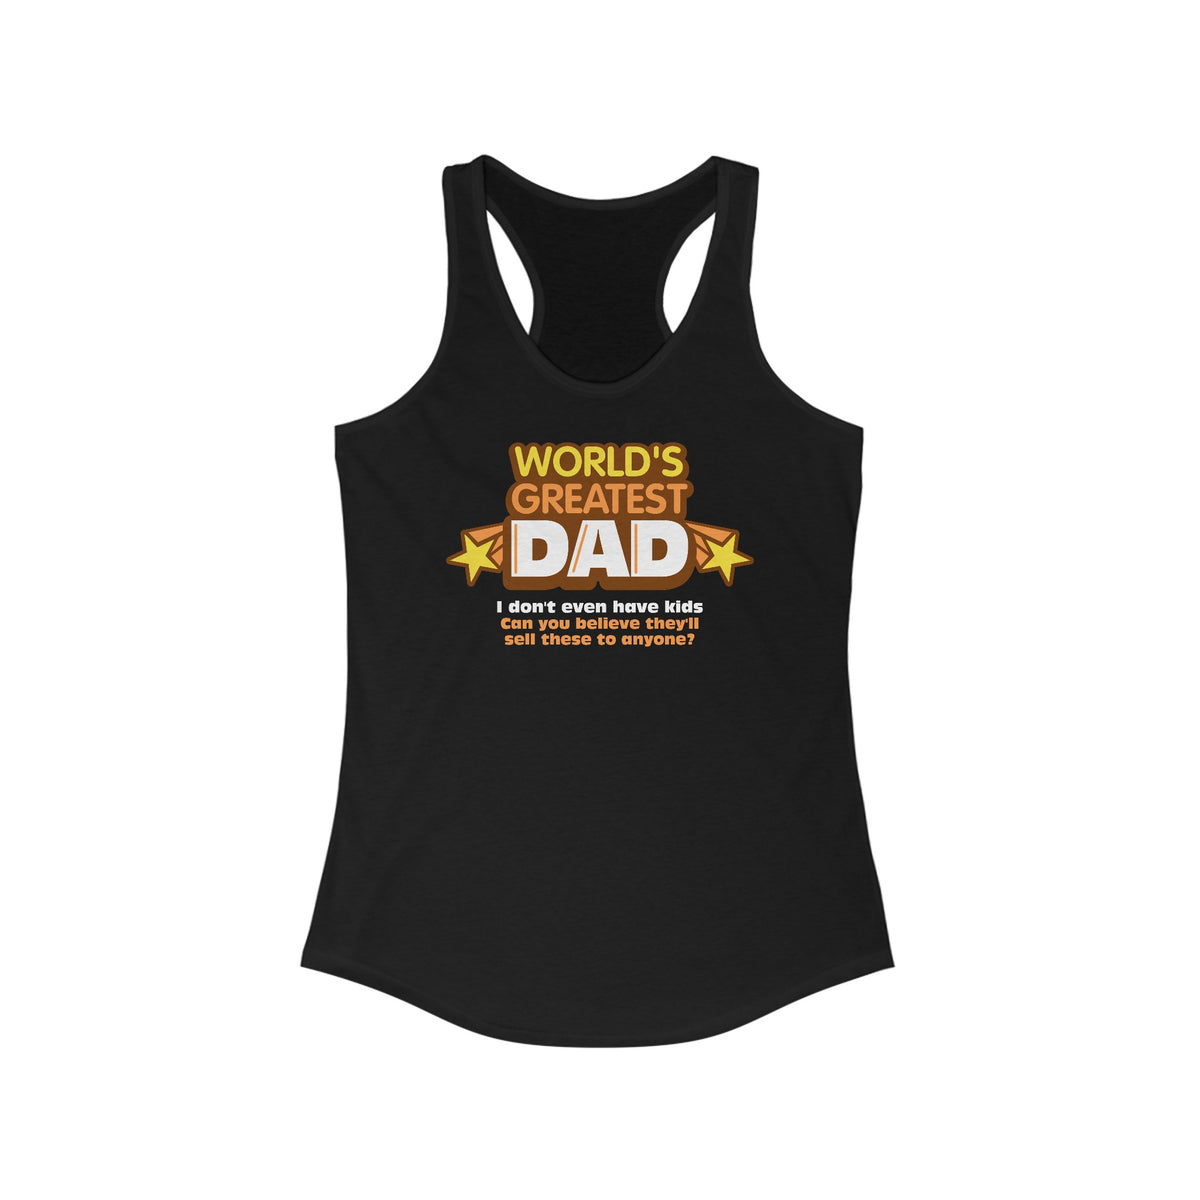 World's Greatest Dad - I Don't Even Have Kids. Can You Believe They'll Sell These To Anyone? - Women’s Racerback Tank